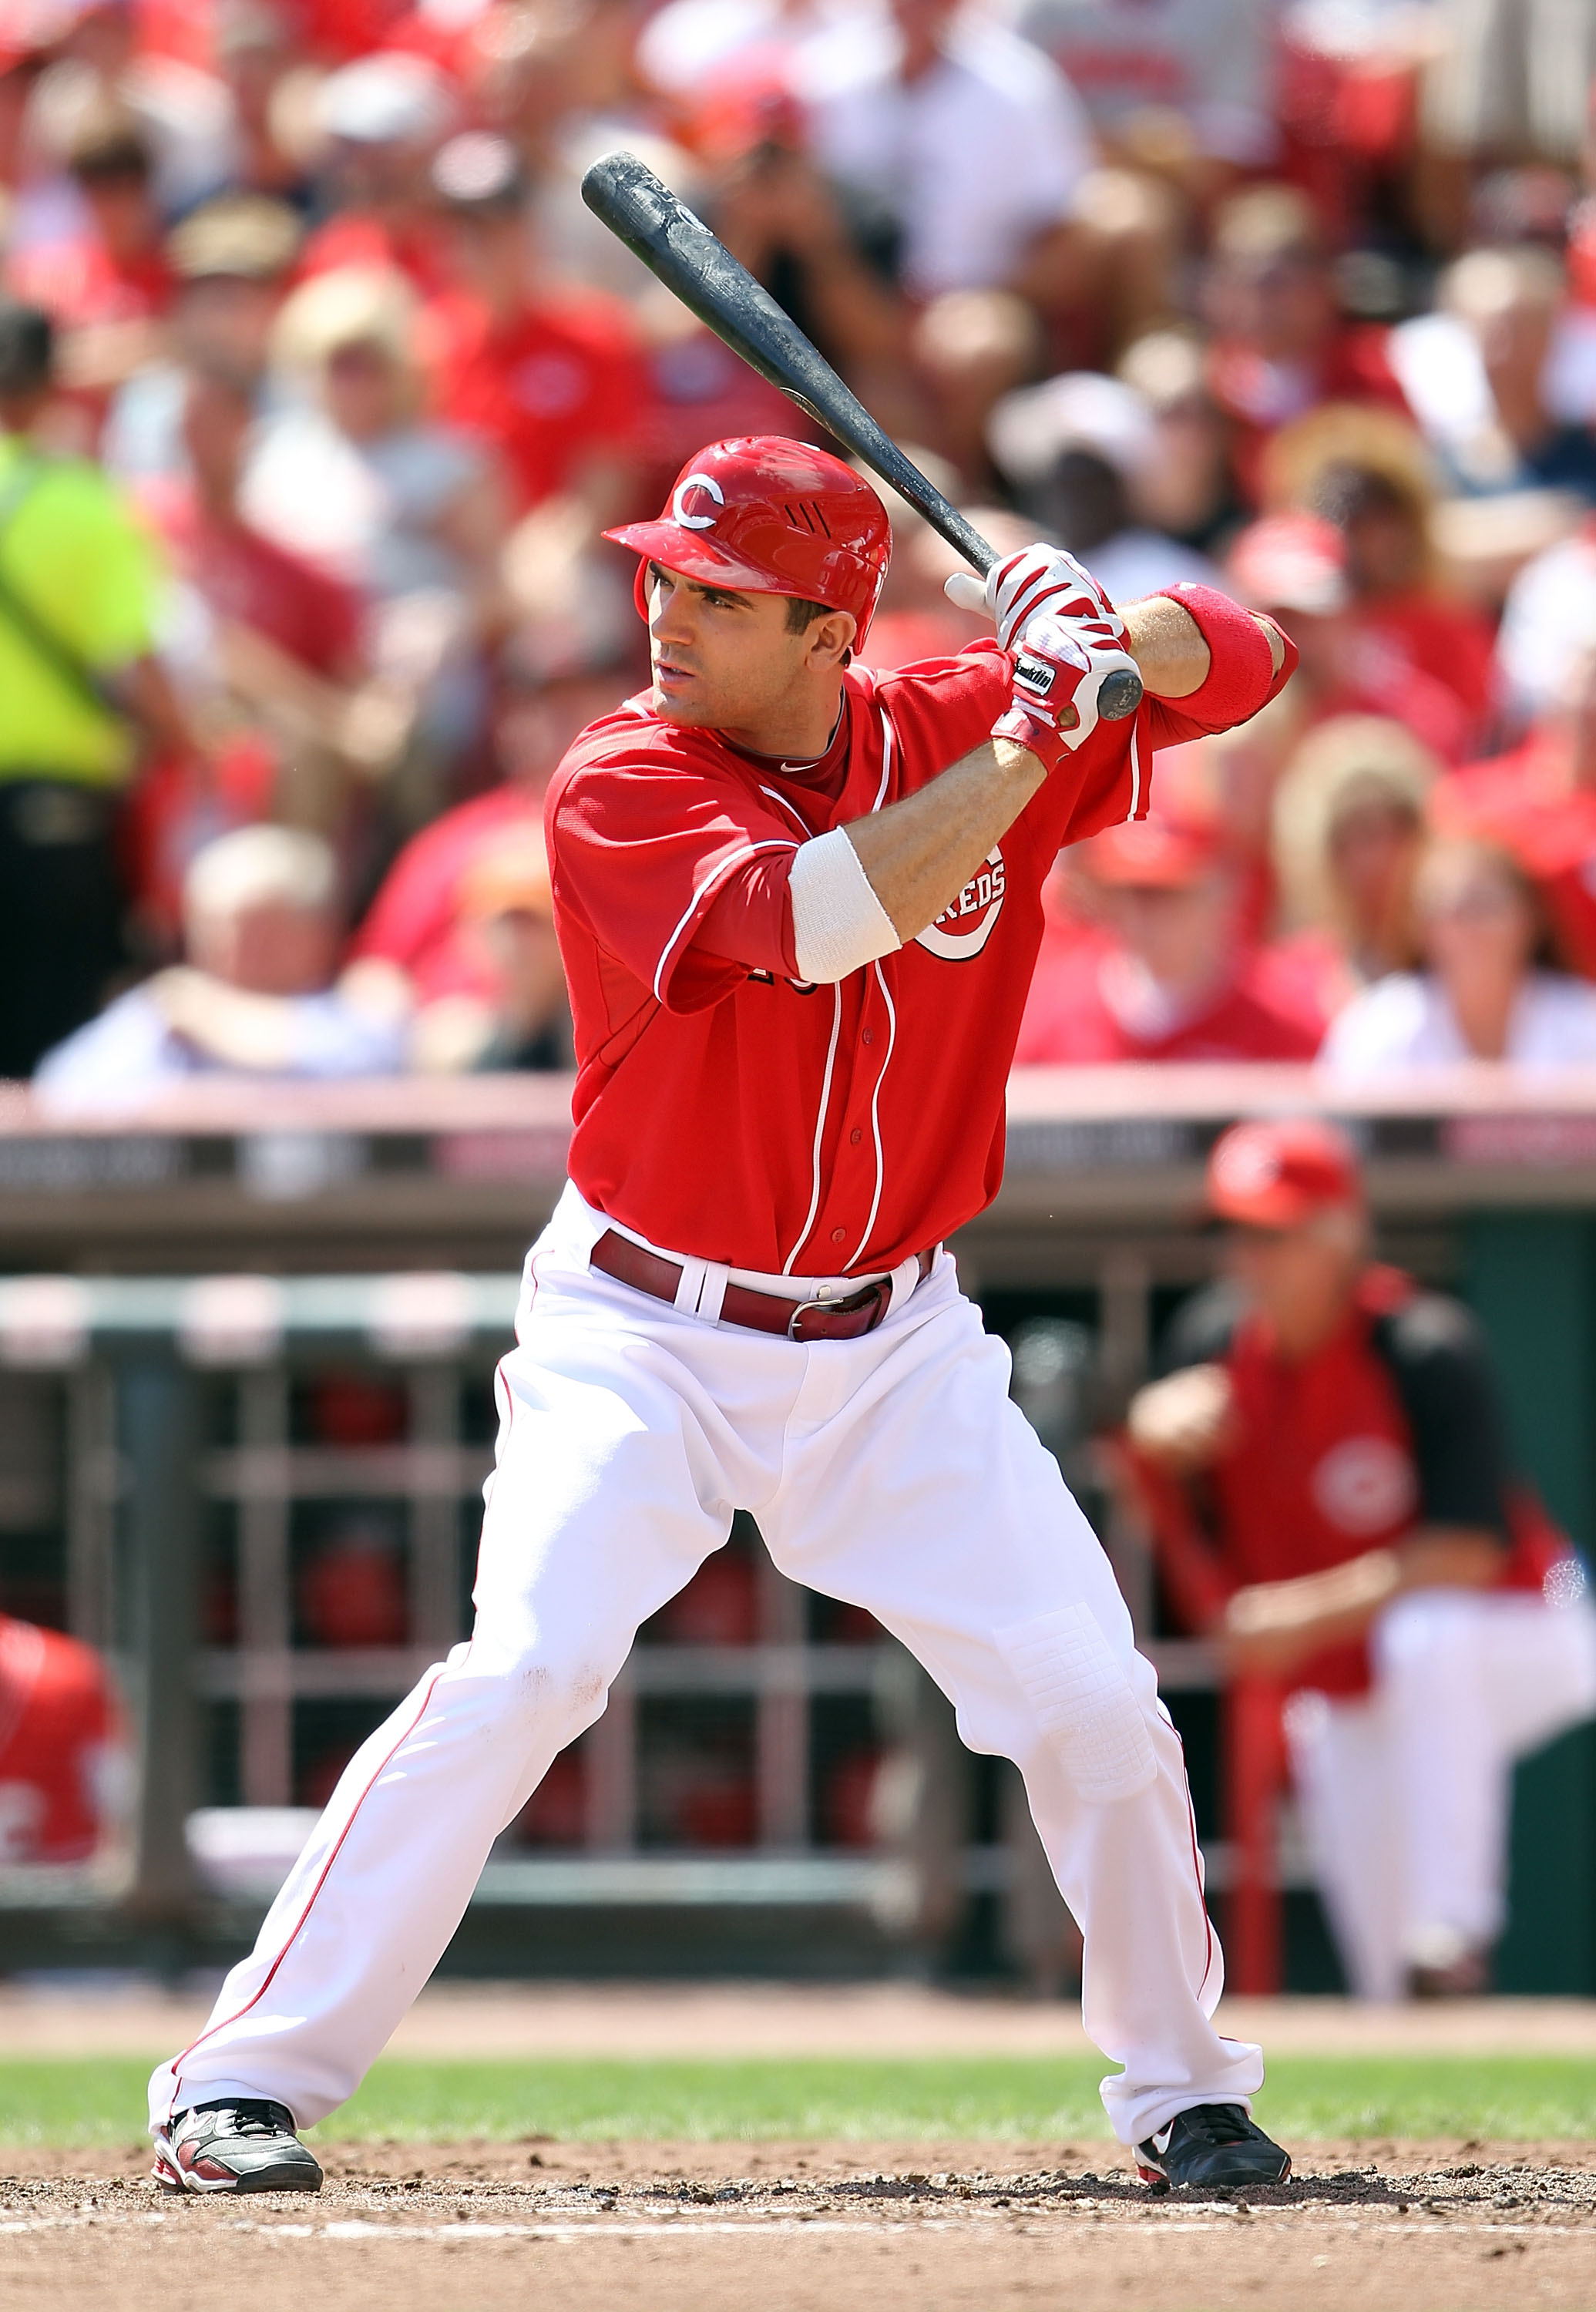 Joey Votto's injury questioned: 'I've been as clear as I can be